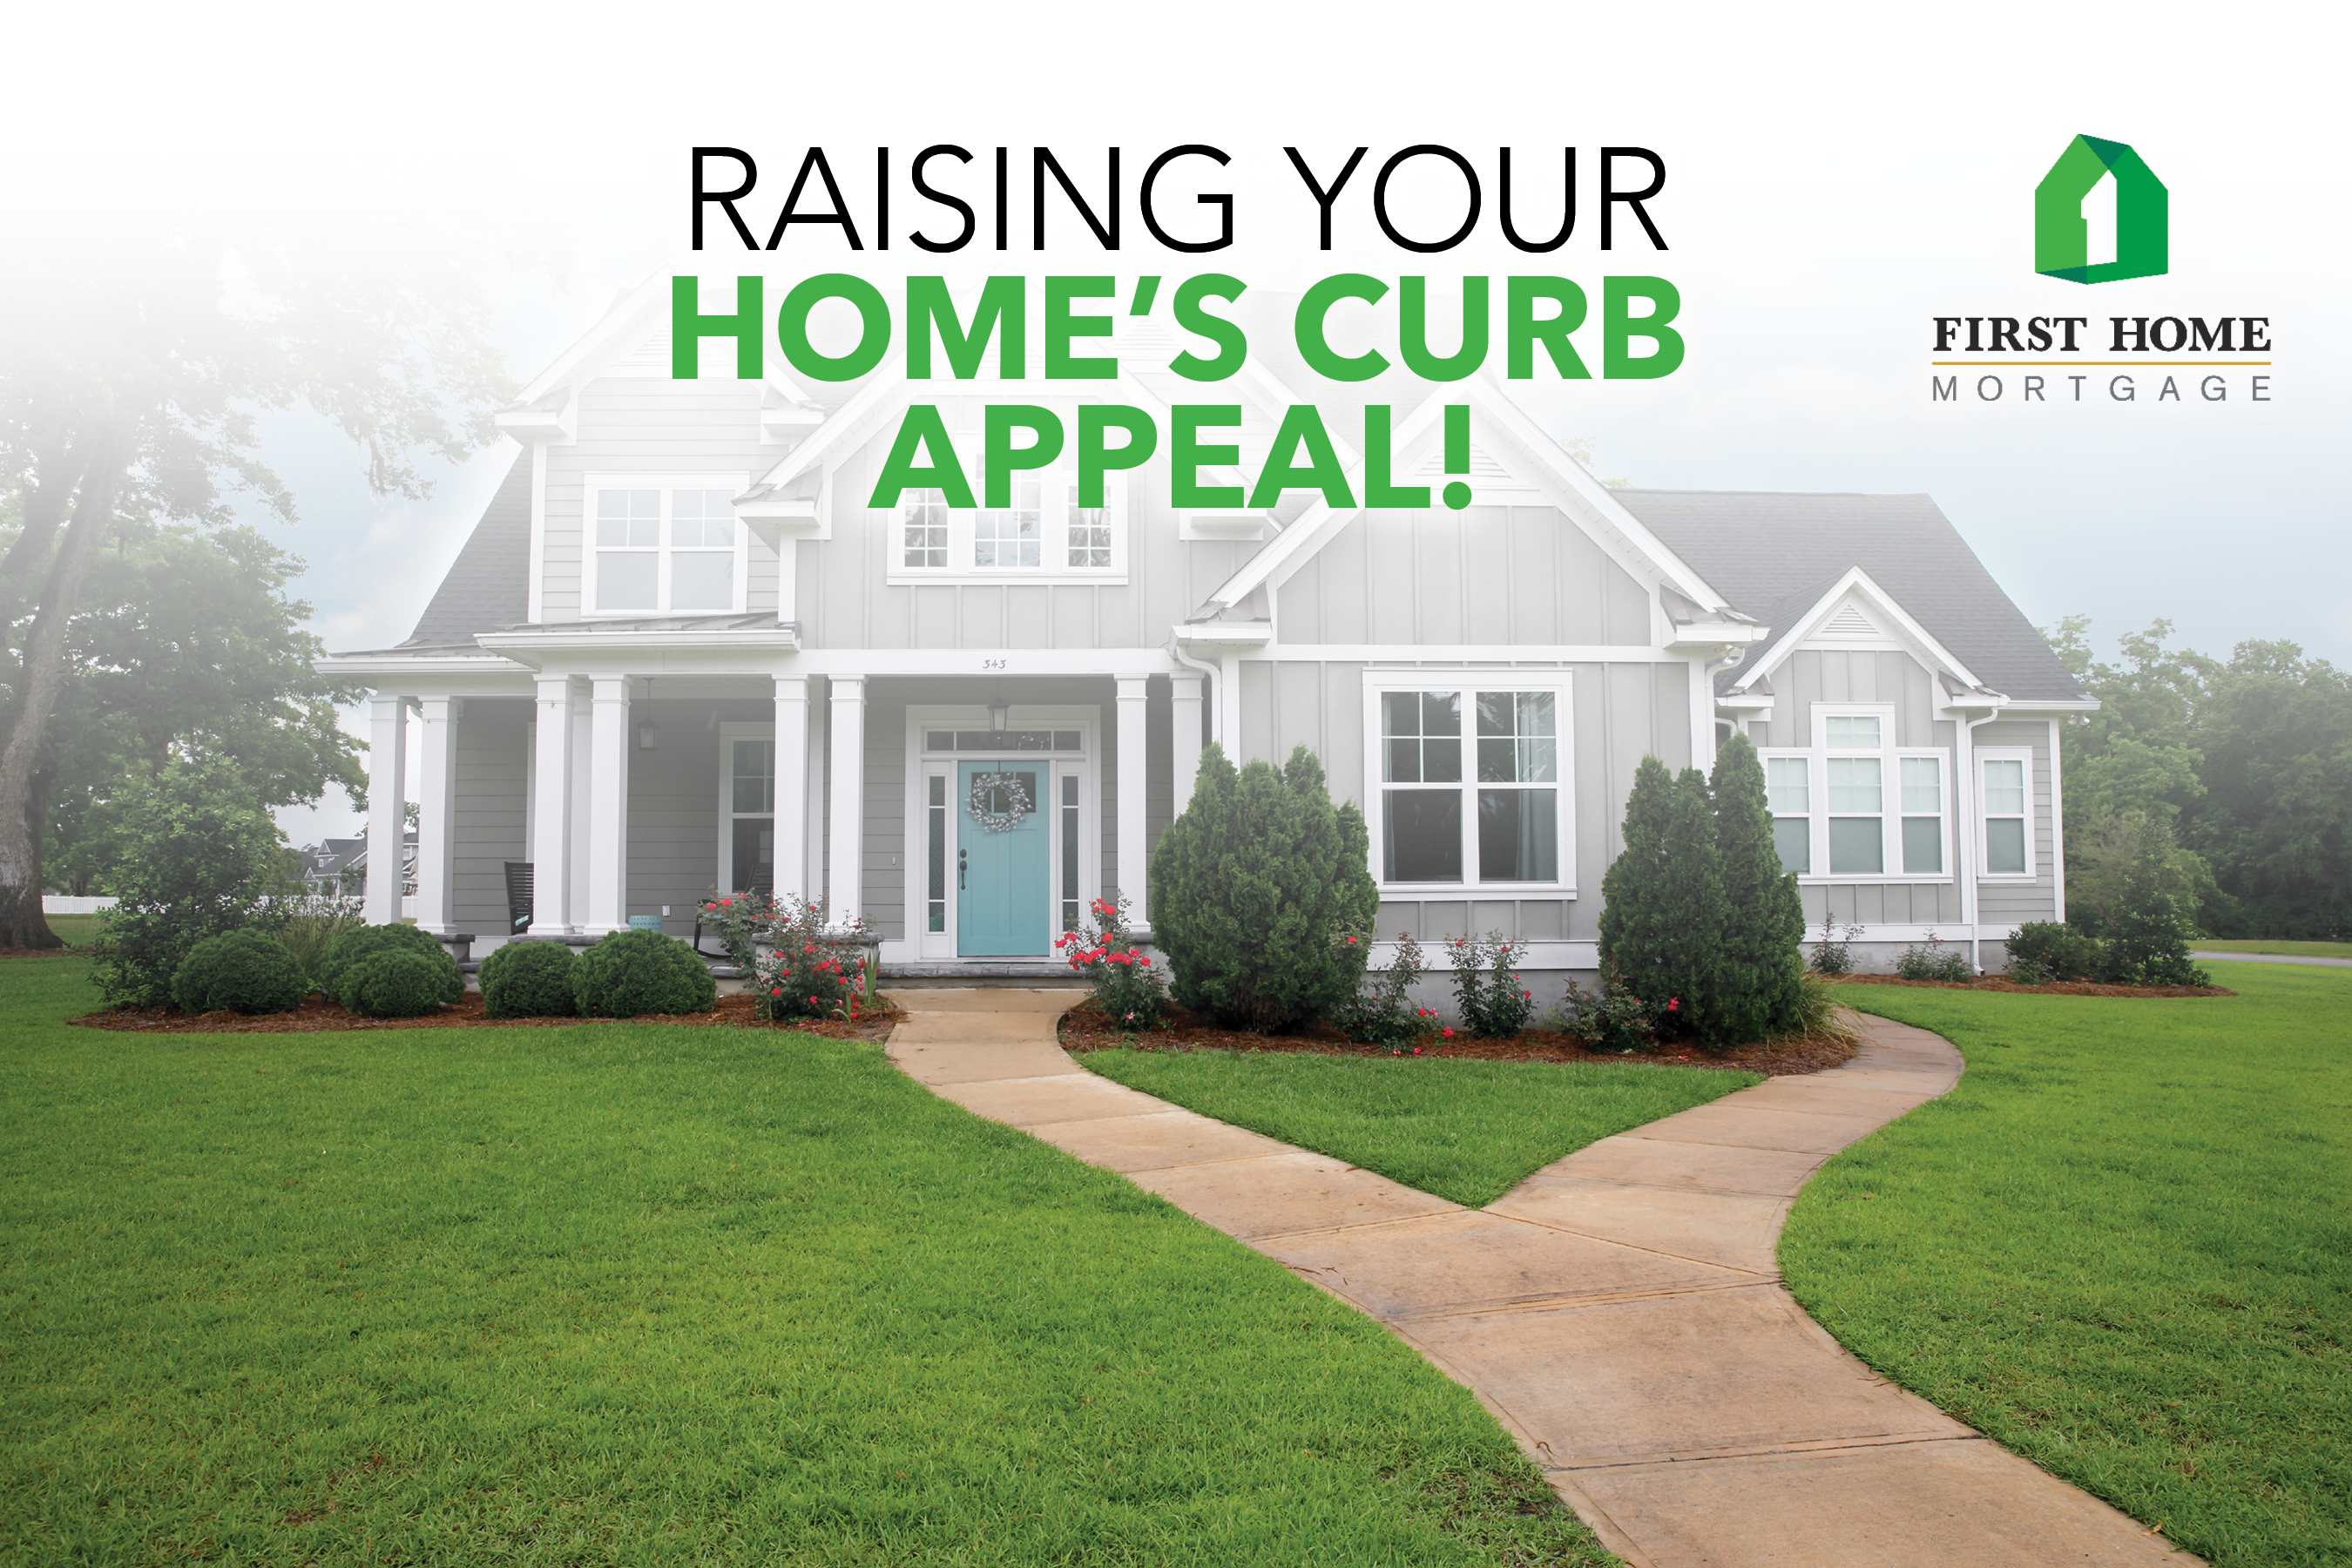 Raising Your Home’s Curb Appeal: The Makeover That Makes the Right First Impression